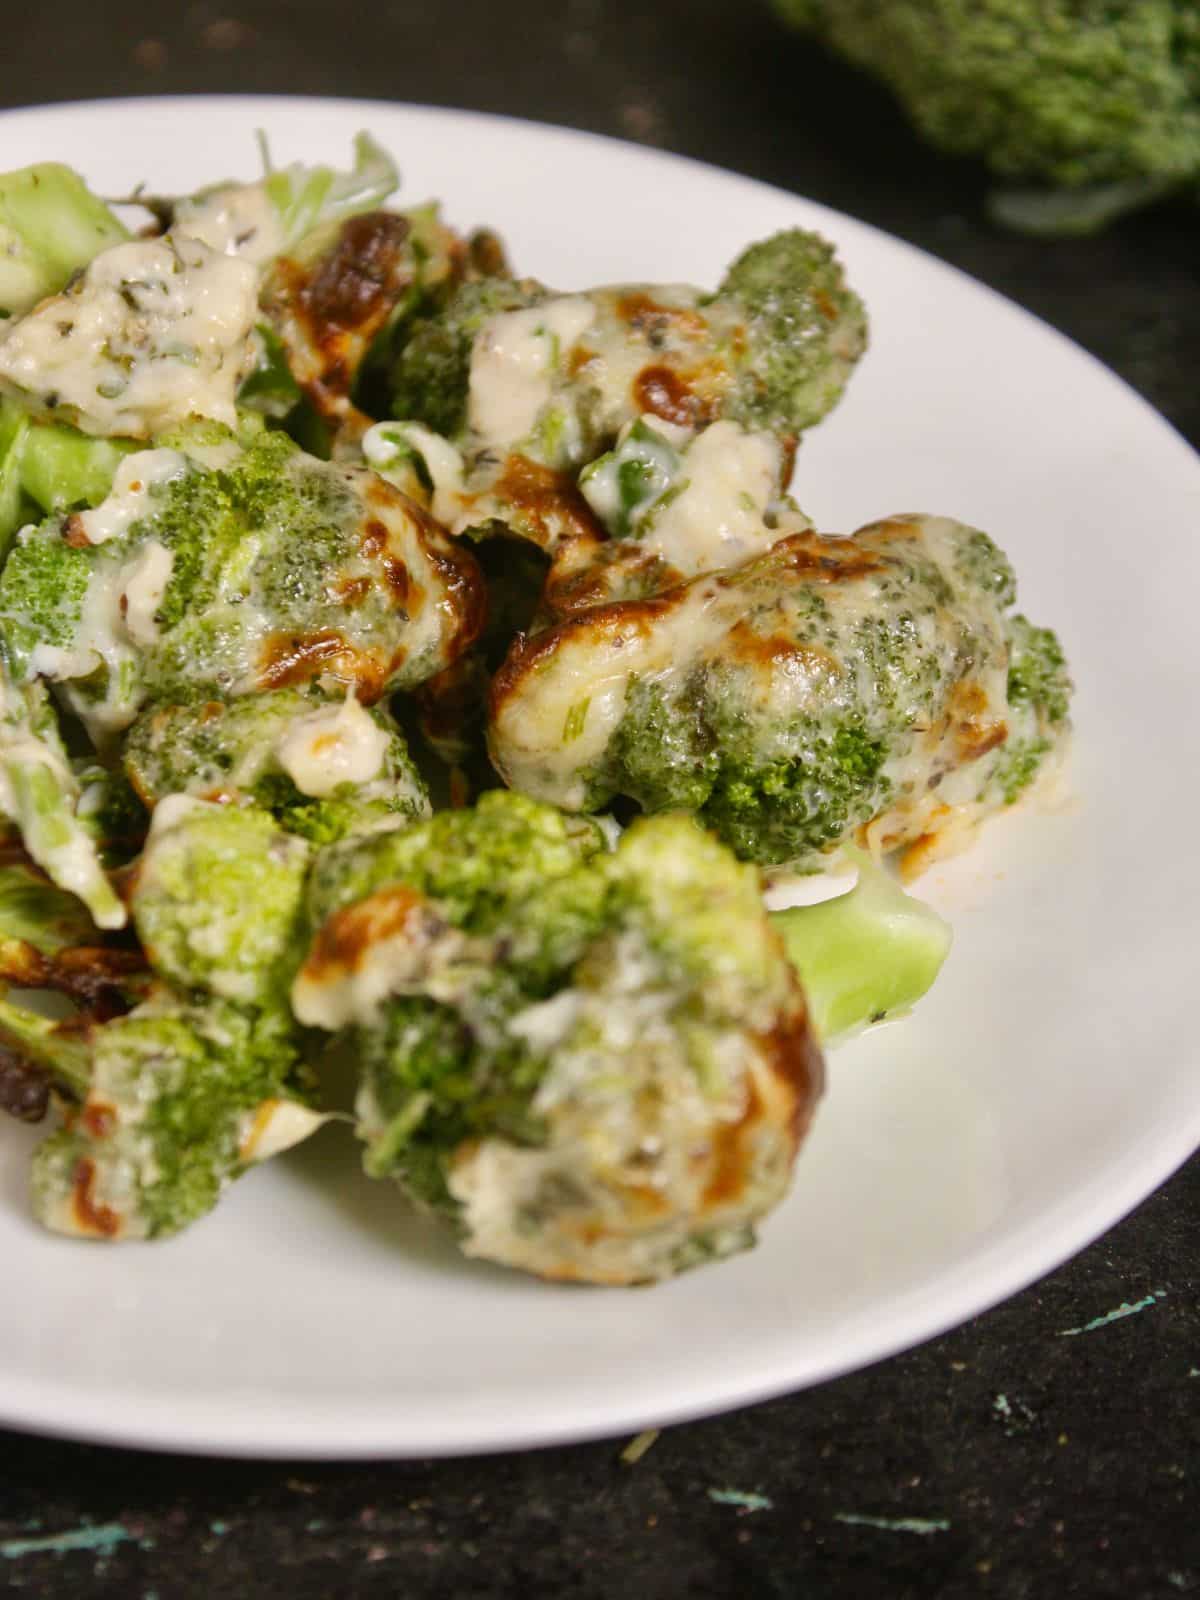 once done serve Air Fried malai broccoli with main dish 